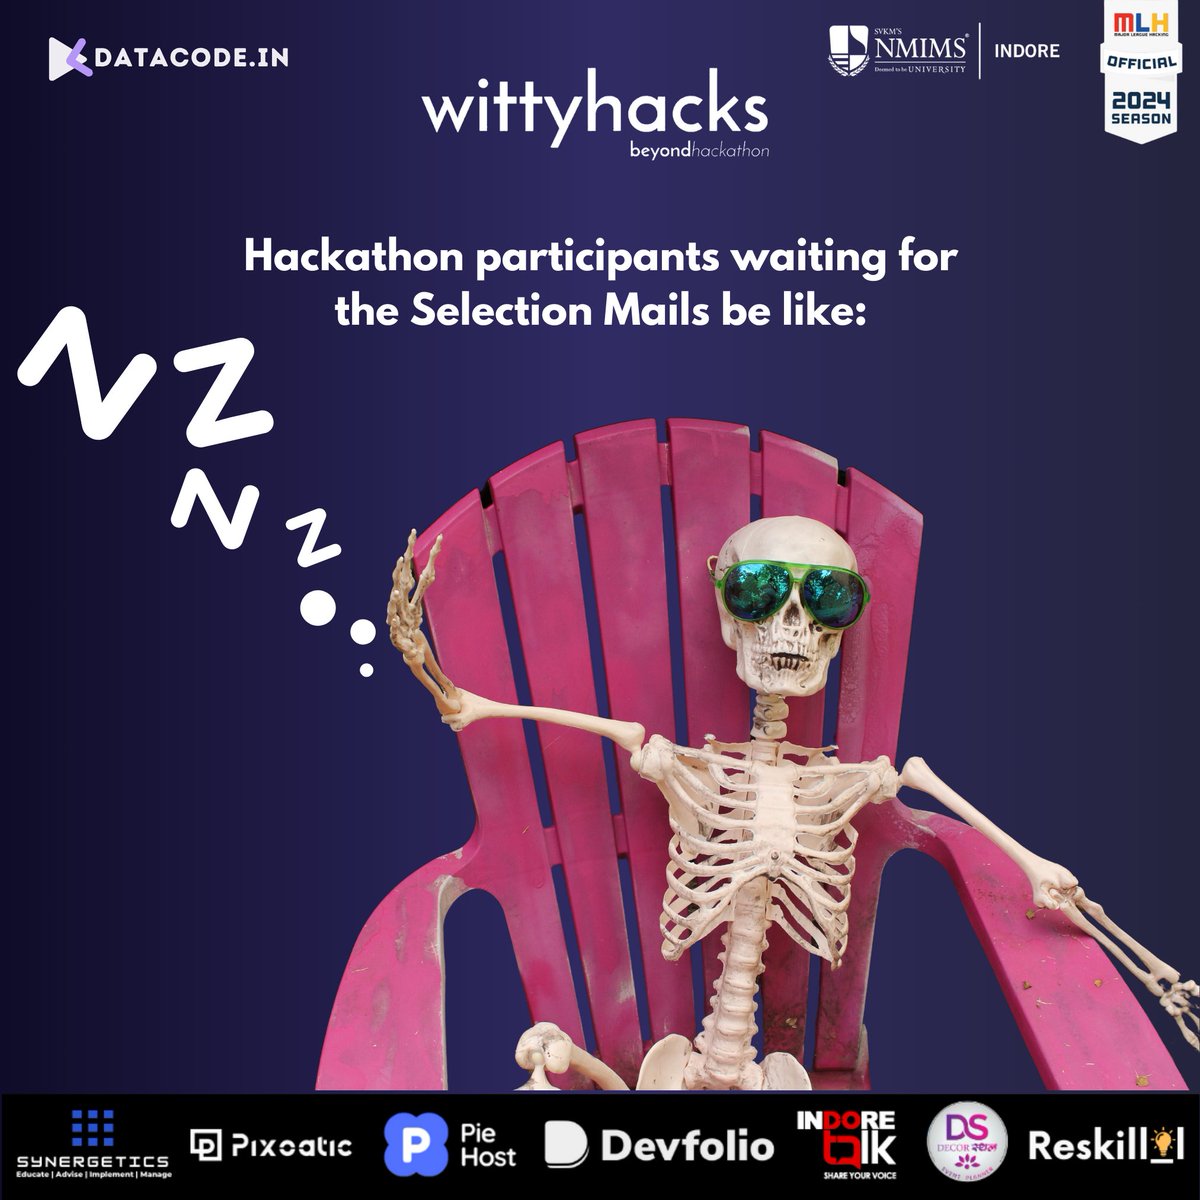 When the wait feels longer, ⏳ remembers: the hackathon has entered its nail-biting phase. Will you make the cut? Stay tuned for the announcements.. #wittyhacks #datacode #hackathon